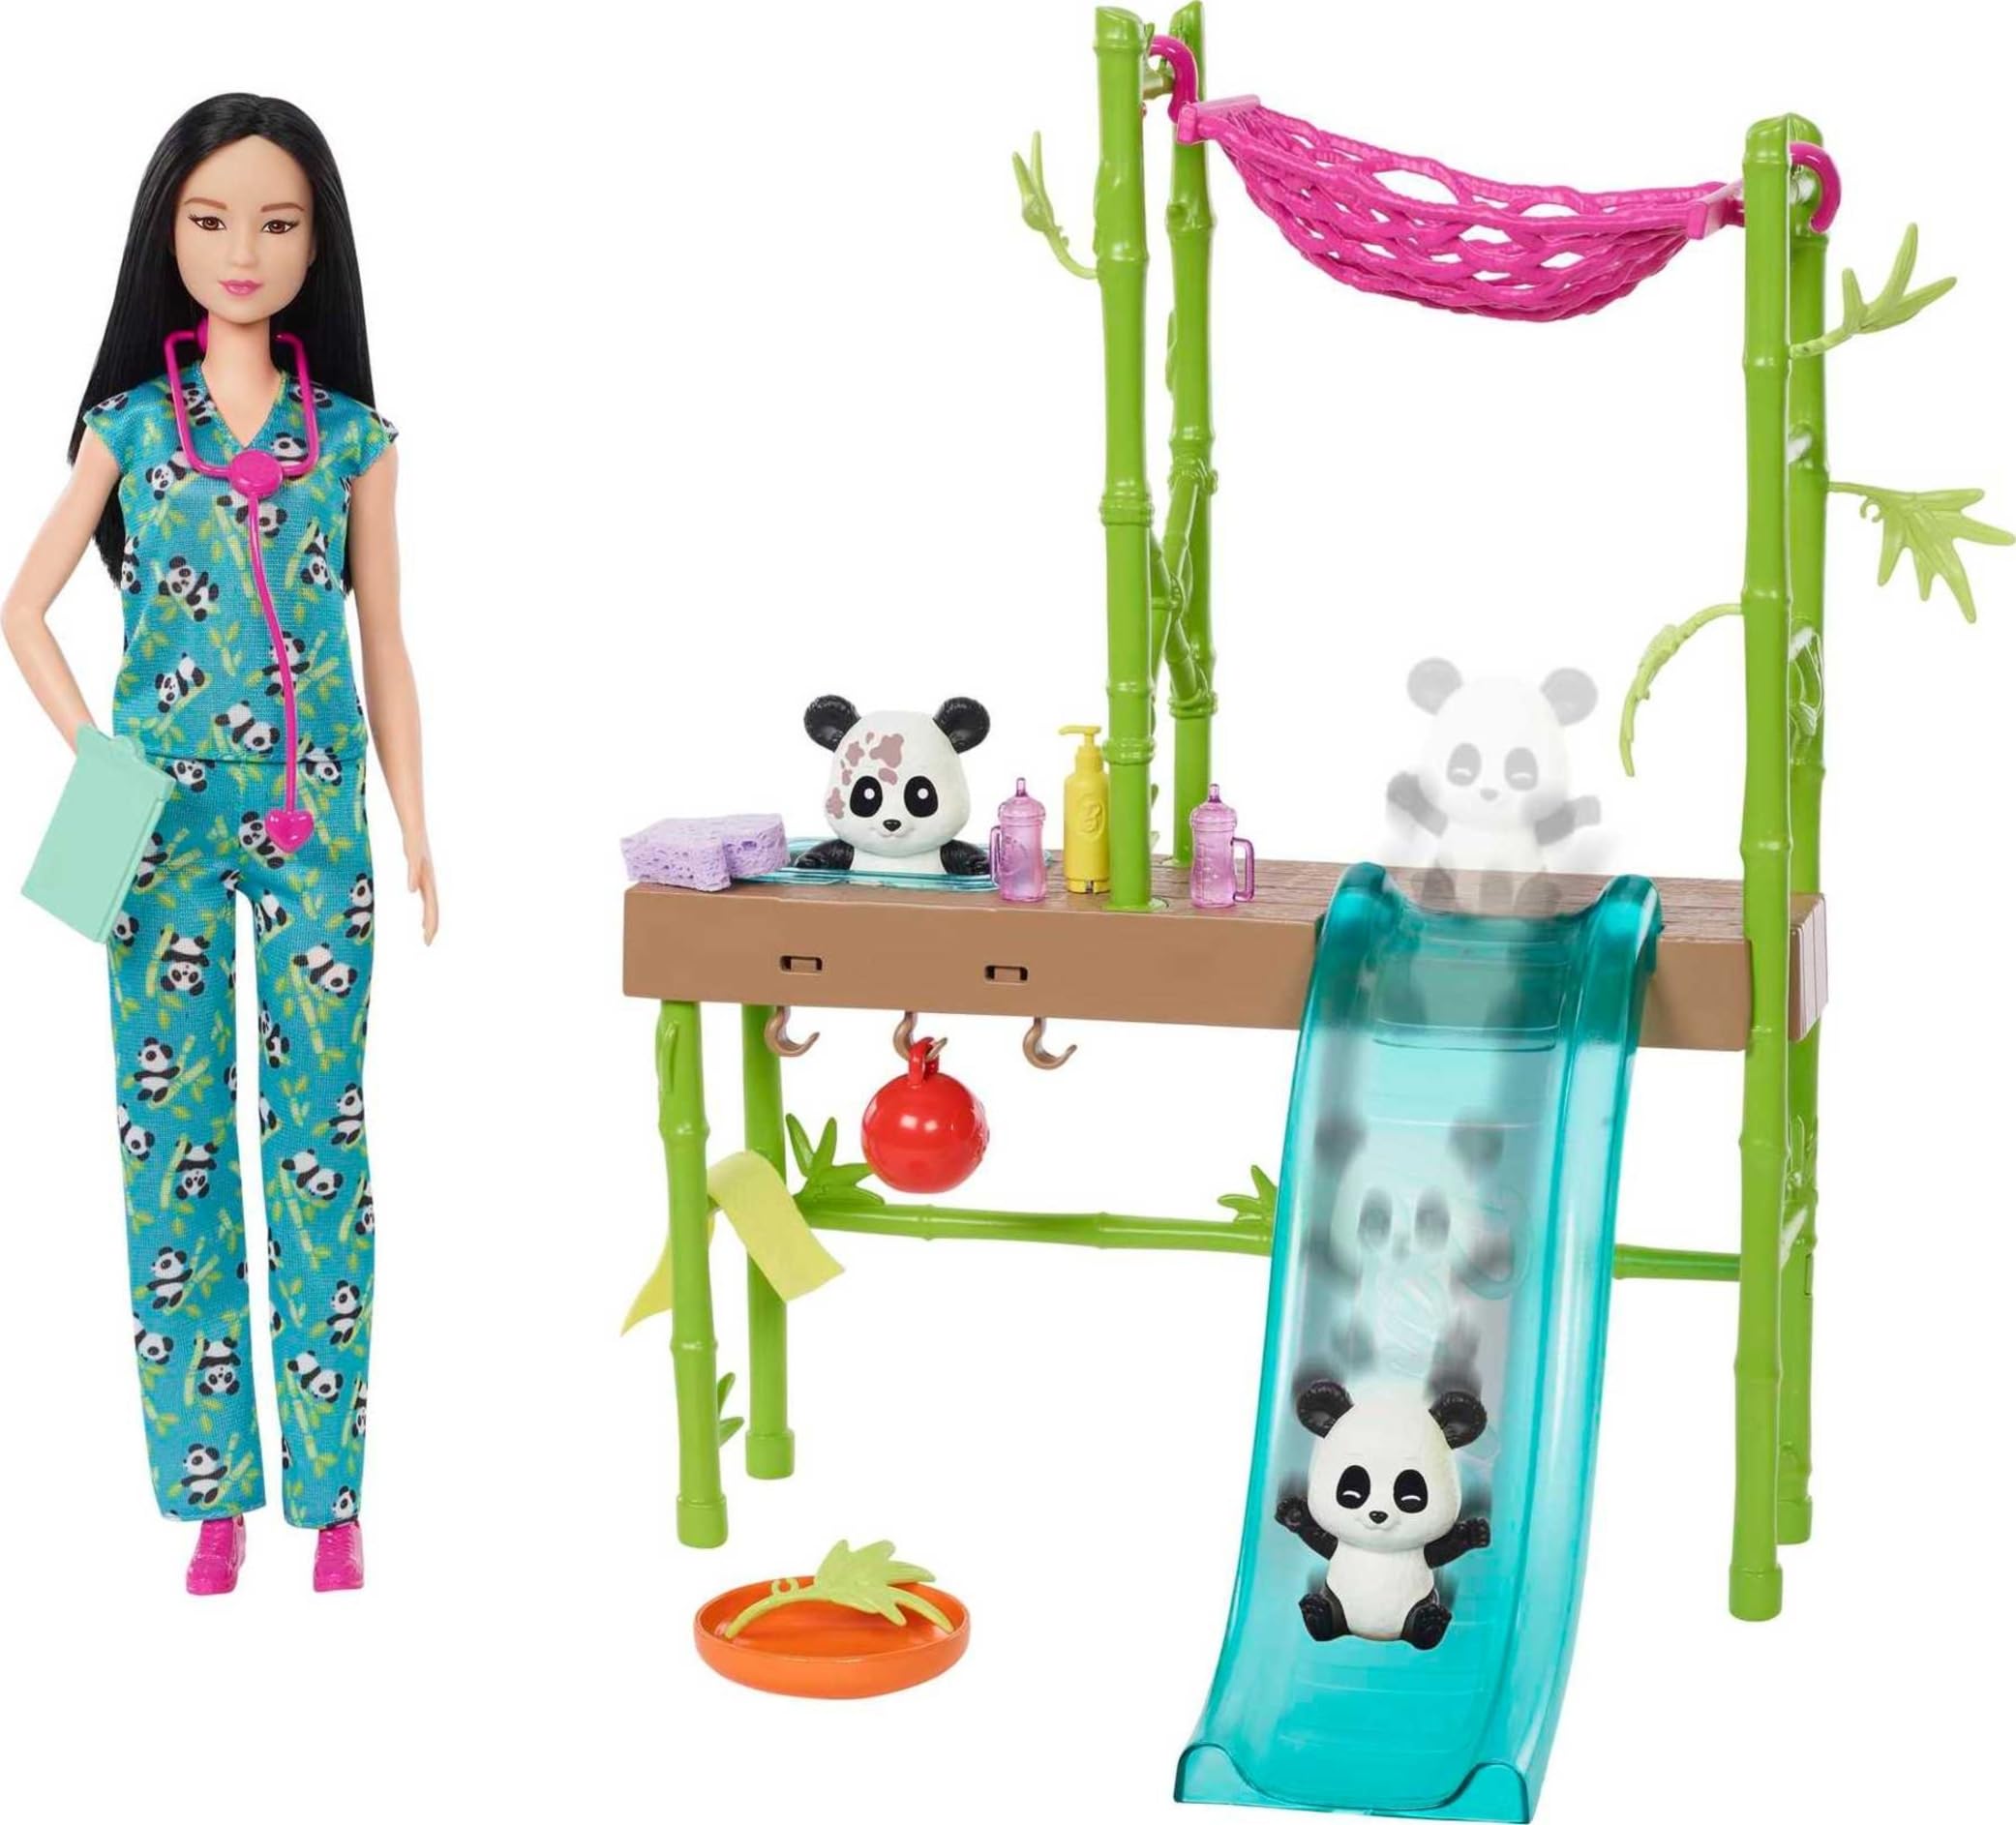 Barbie Careers Doll & Playset: Baby Panda Care and Rescue with Vet Doll, 2 Color-Change Pandas & 20+ Accessories $16.93 + Free Shipping w/ Prime or on $35+